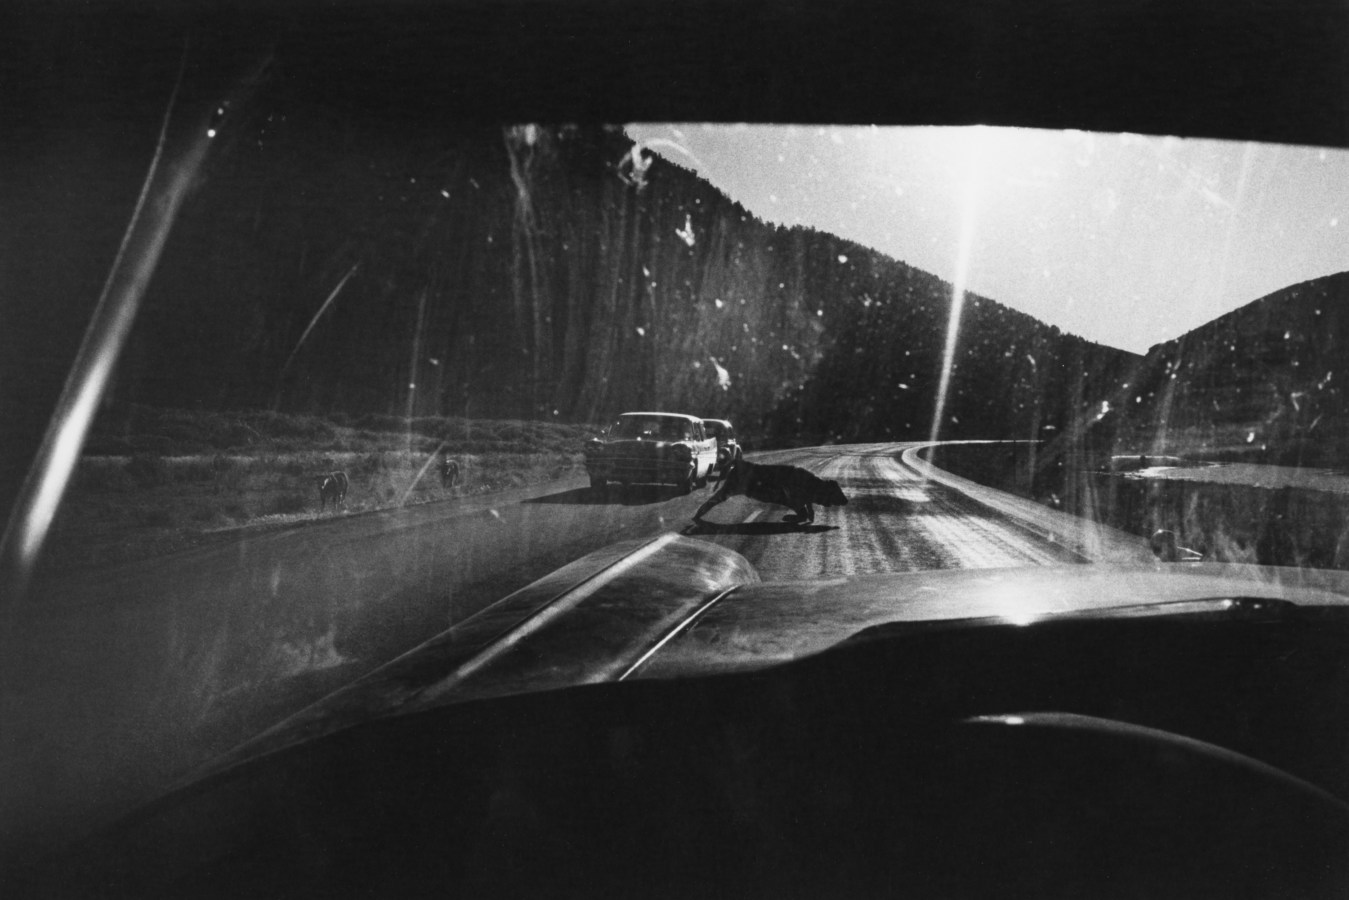 Black-and-white photograph taken through a car's front windshield of a calf crossing the road